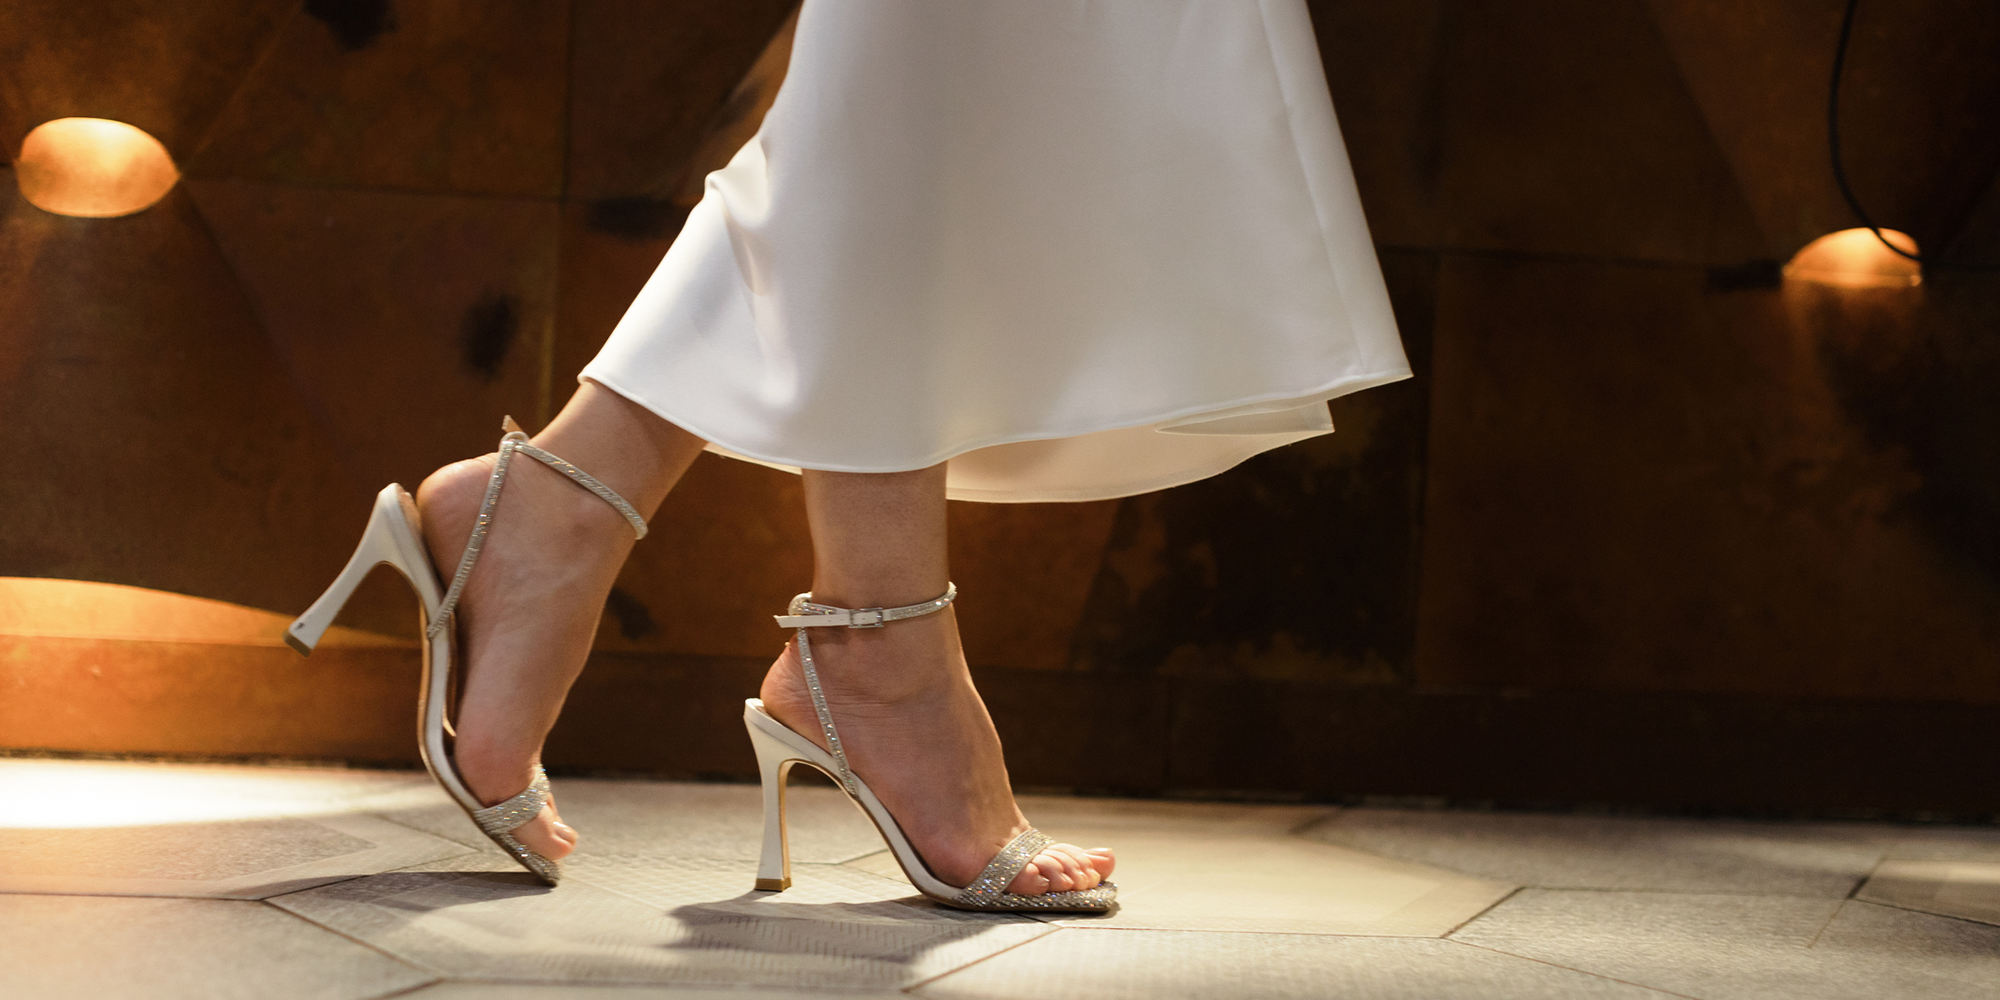 How to walk in high heels without pain, according to an expert photo